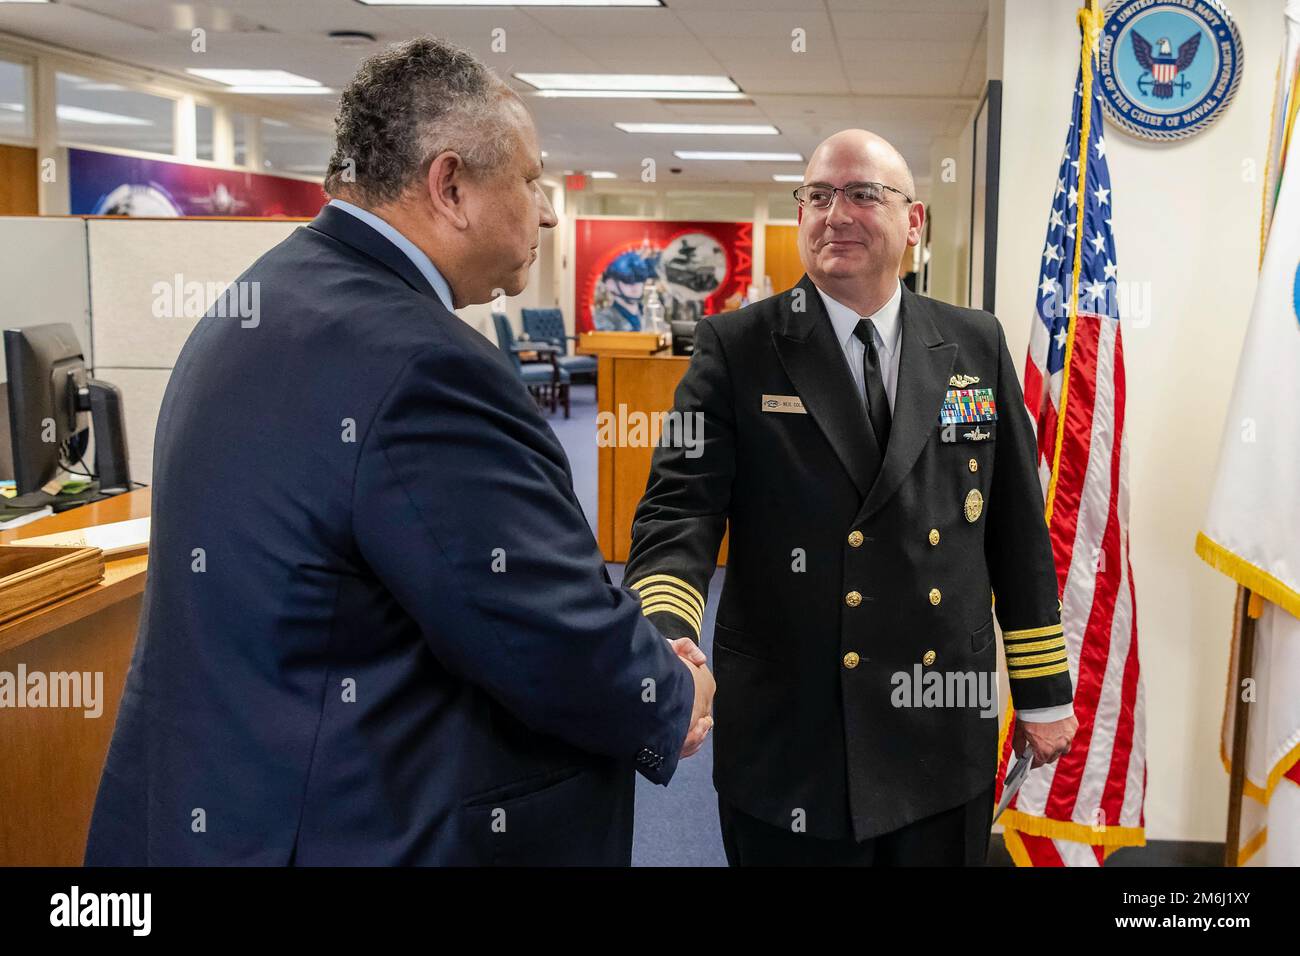 SECNAV Carlos Del Toro (left) is welcomed to the ONR front office by ACNR Capt. Neil Colston (right).    SECNAV was briefed on a broad range of topics by the team at the Office of Naval Research including the Future Naval Capabilities (FNC) and Innovative Naval Prototype (INP) portfolios to increase capabilities of Marines and Sailors, STEM outreach, and ONR's overall global reach and involvement. Stock Photo